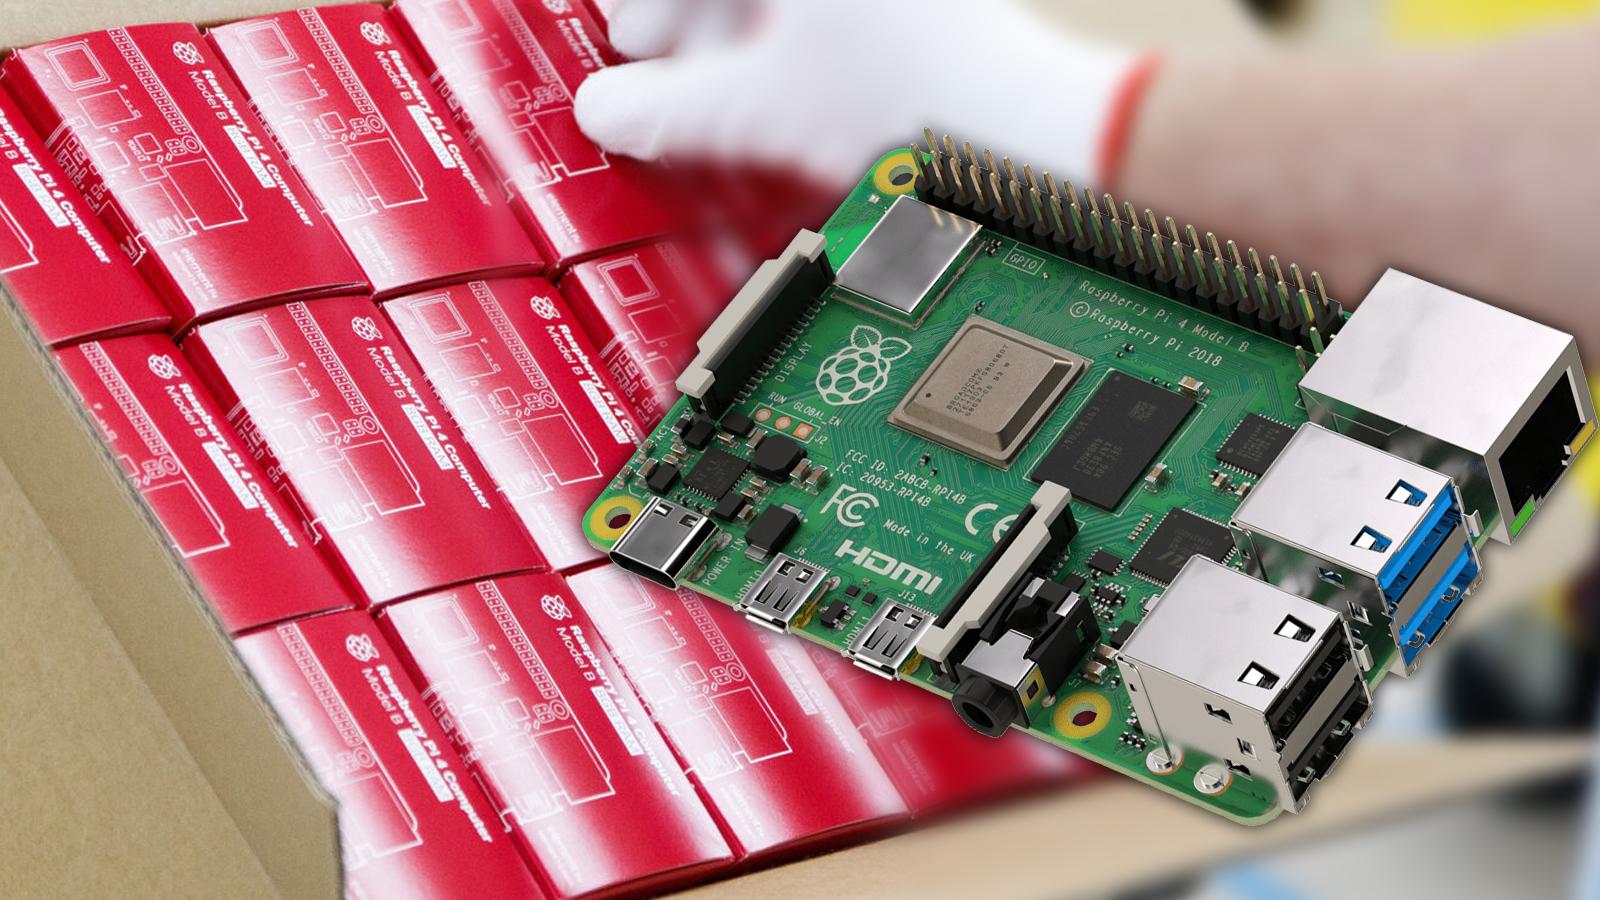 Raspberry Pi packages